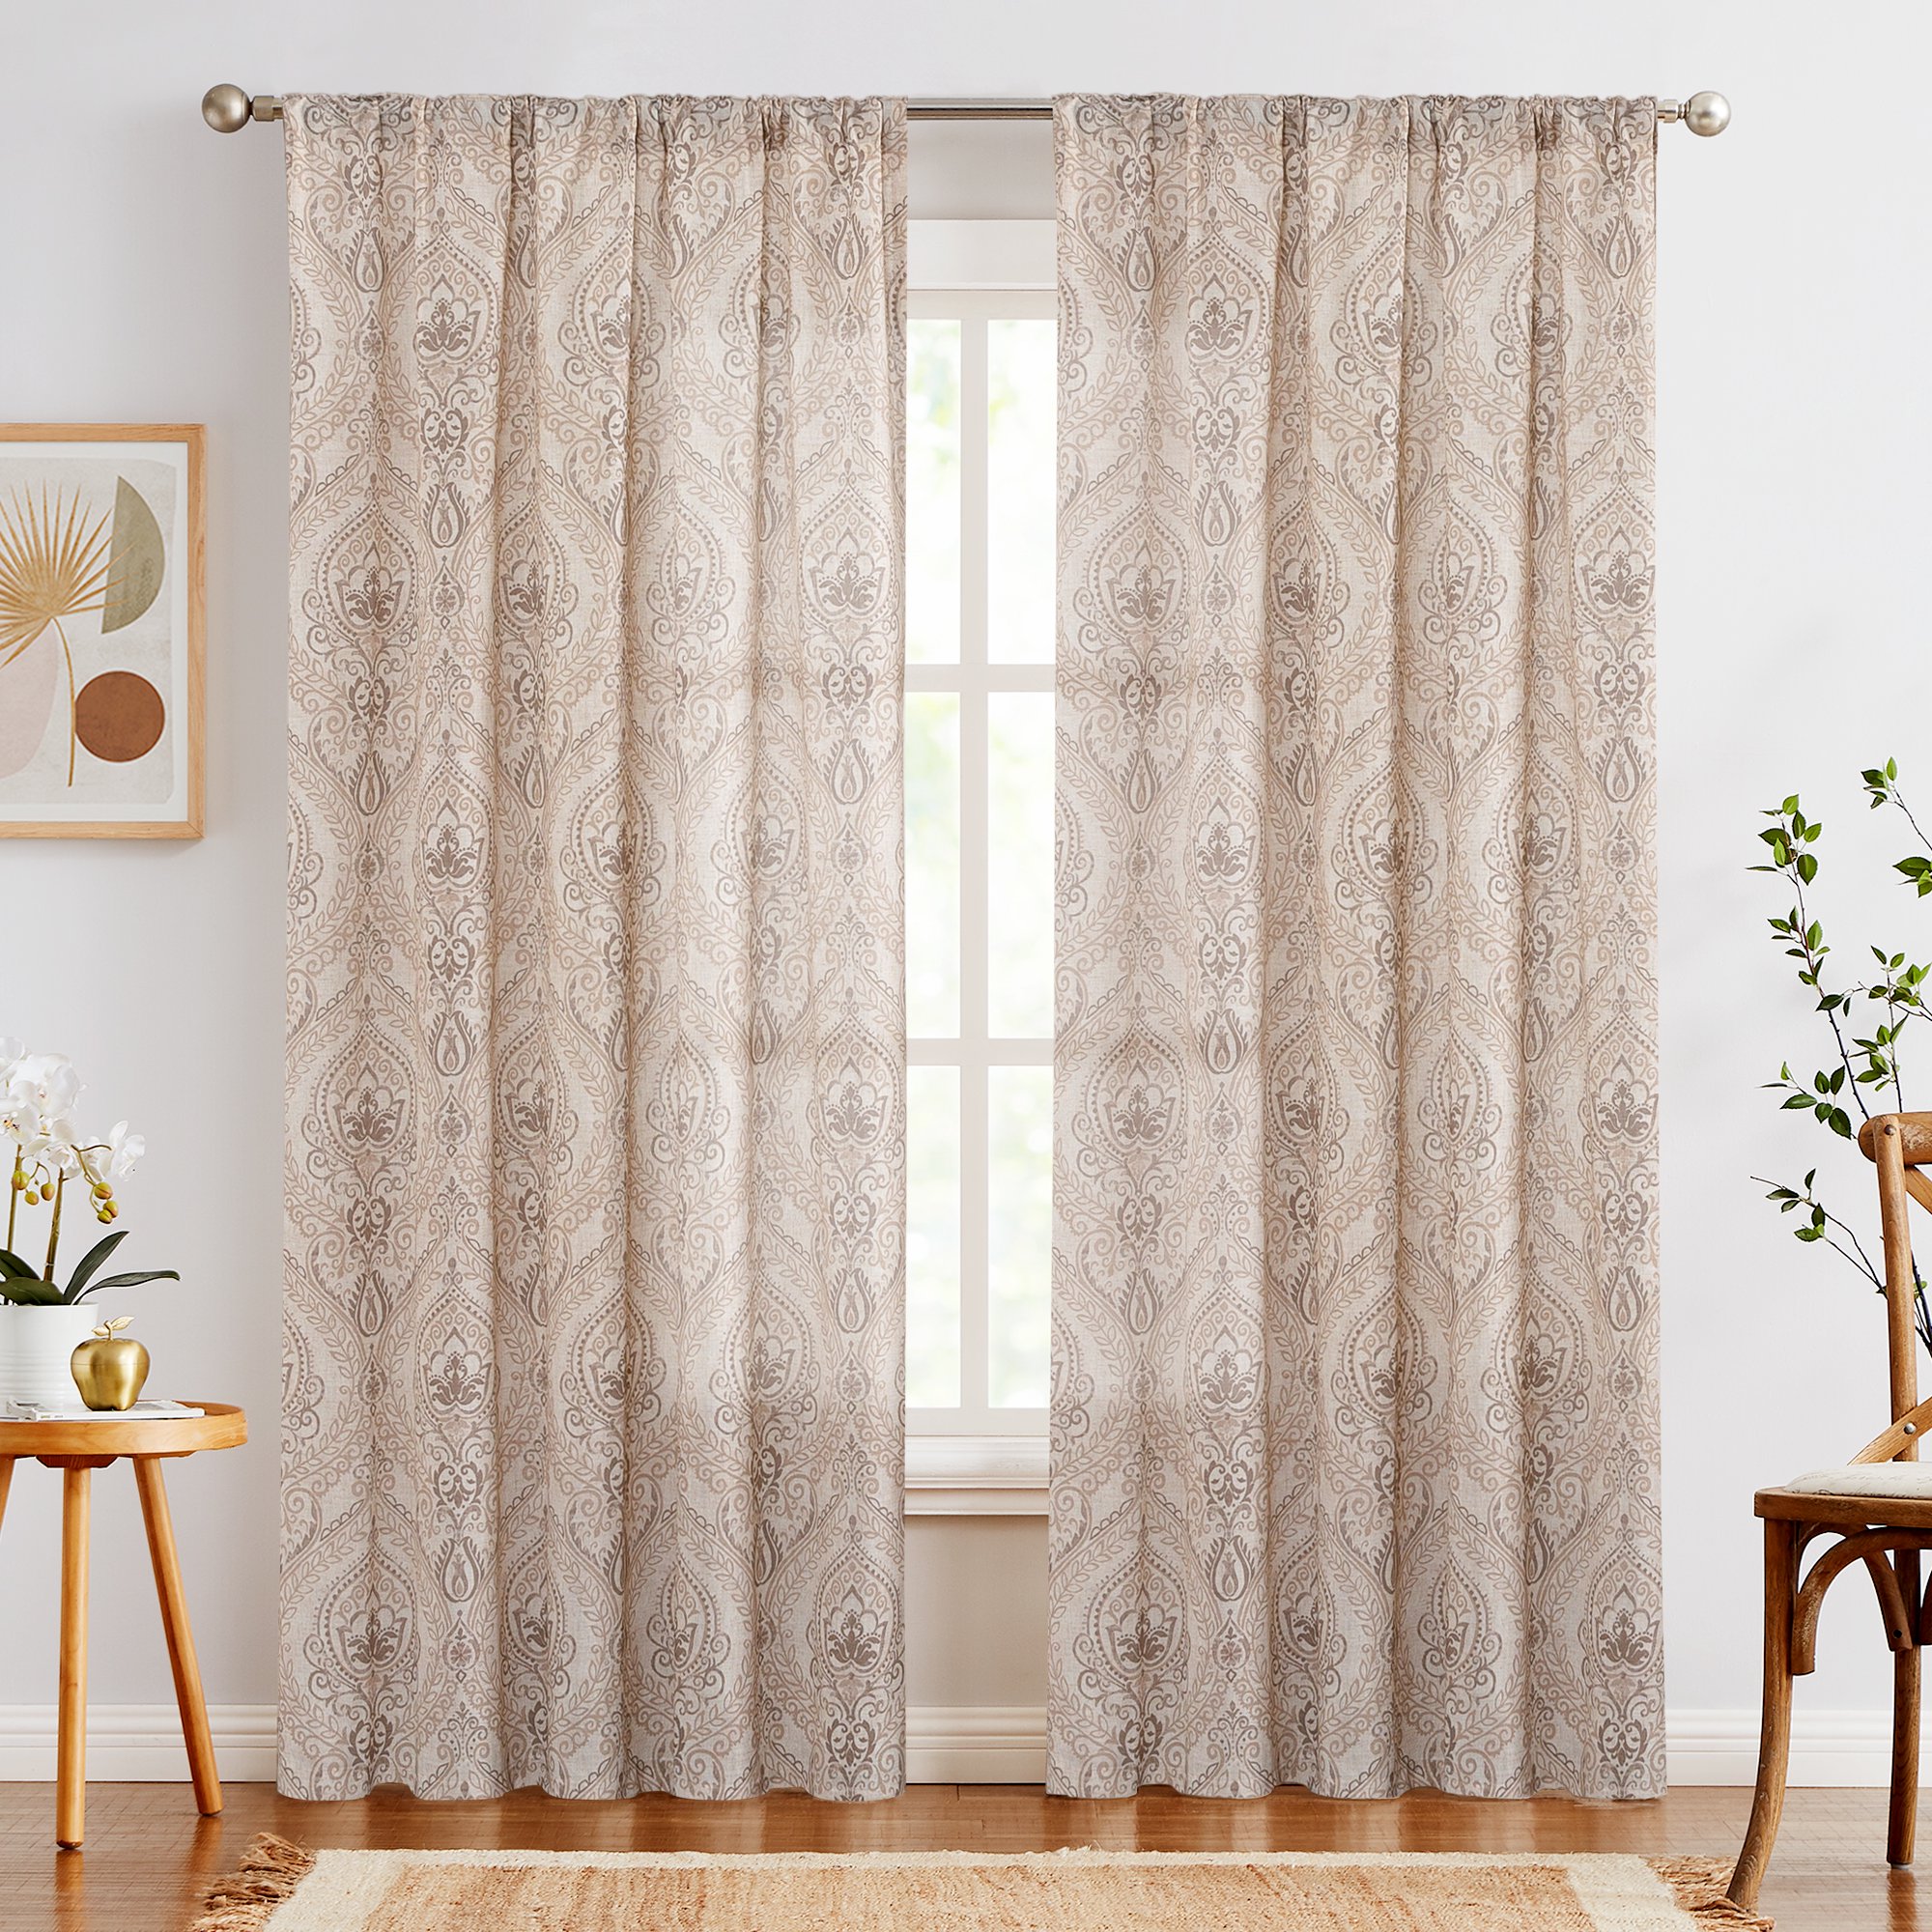 CURTAINKING Linen Curtains for Living Room 84 inch Damask Printed ...